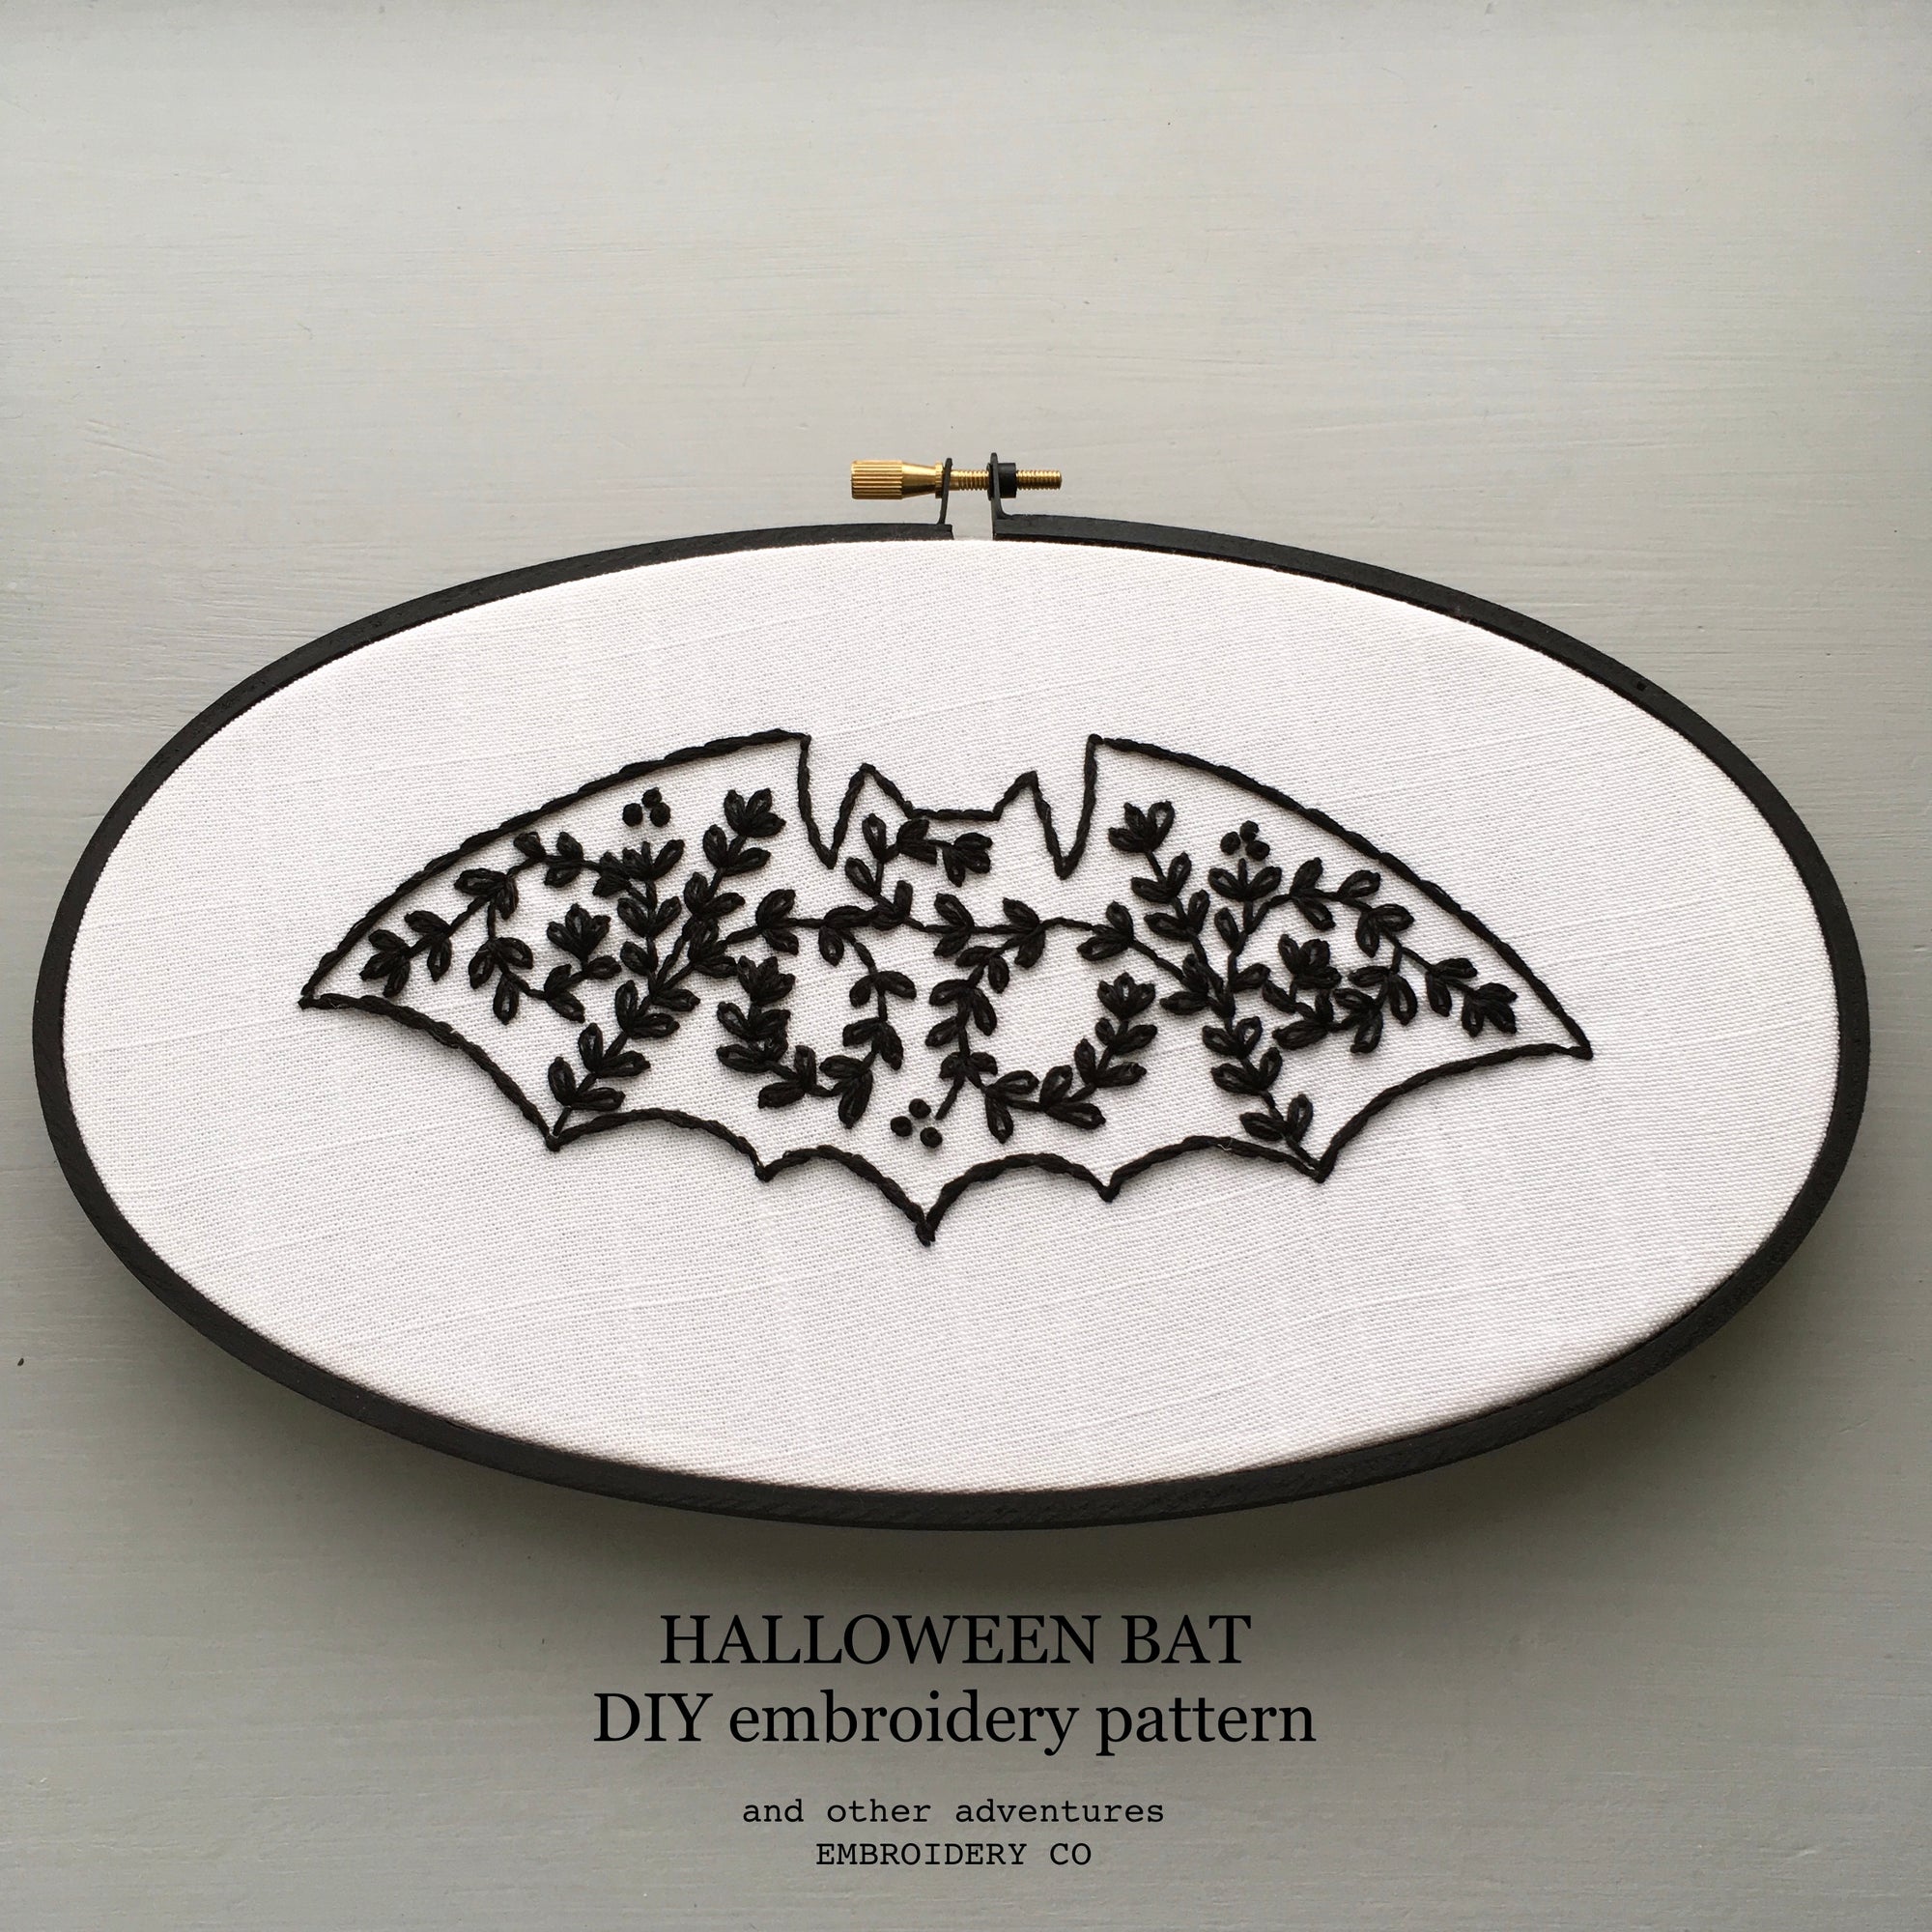 Halloween Bat DIY embroidery pattern by And Other Adventures Embroidery Co